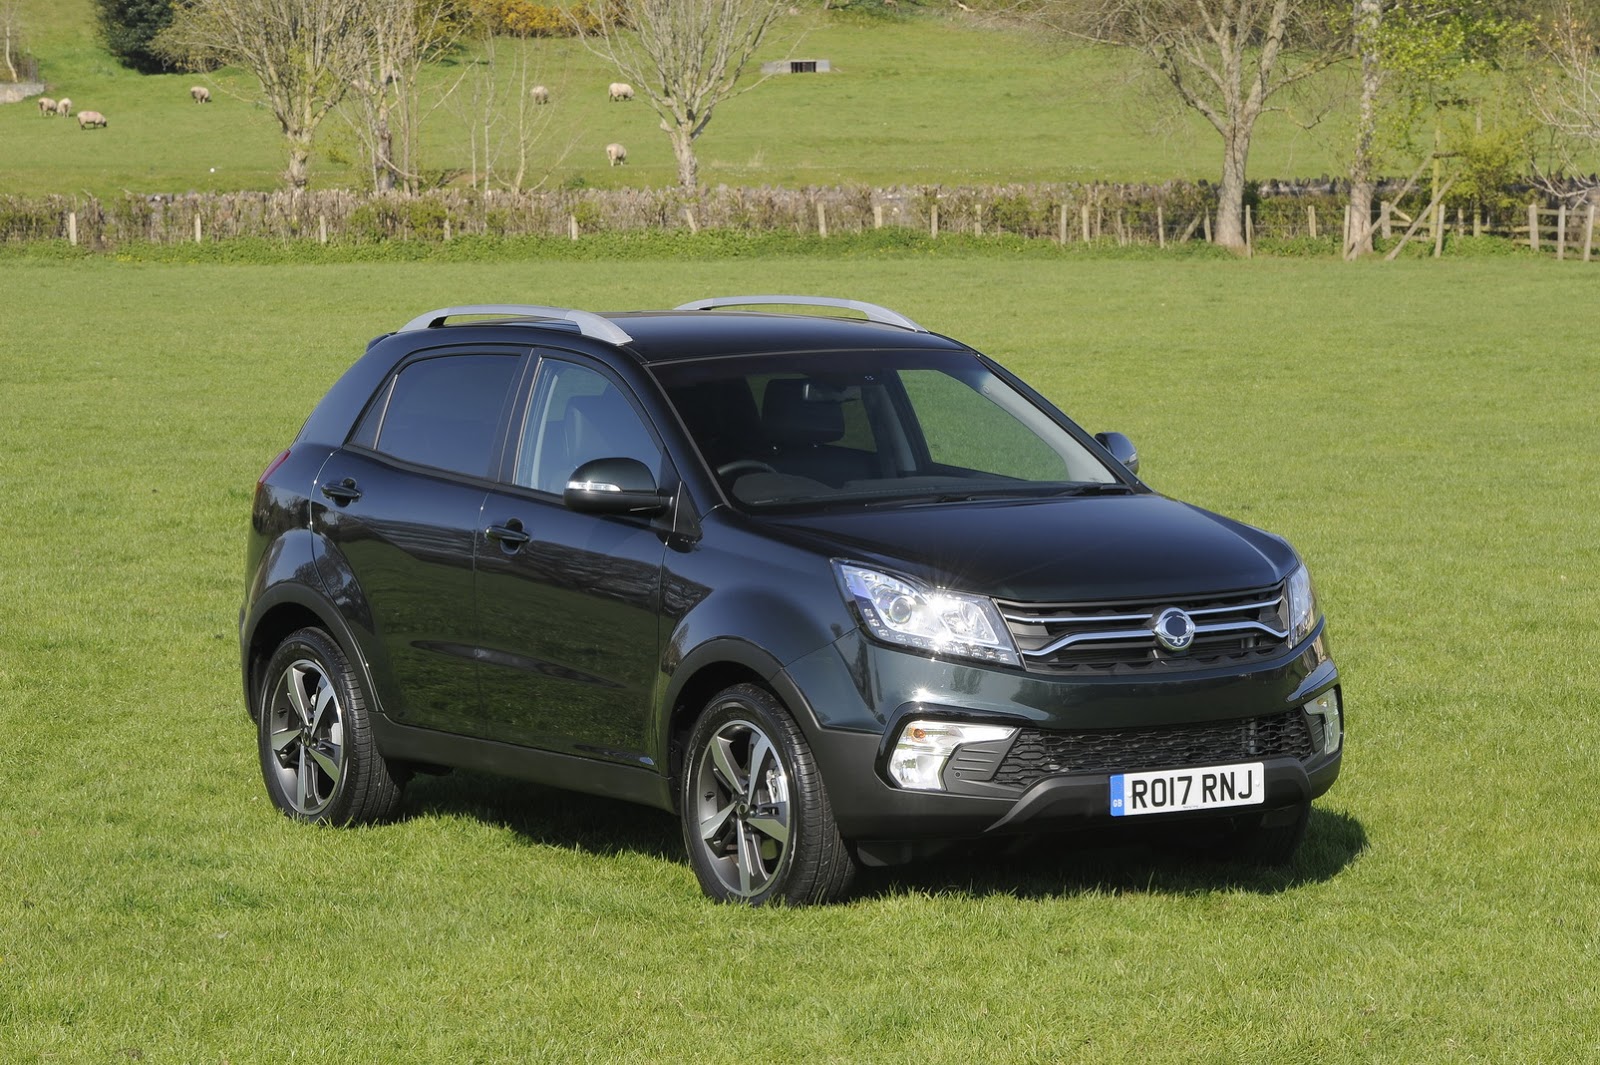 SsangYong Launches Restyled 2017 Korando In The UK | Carscoops